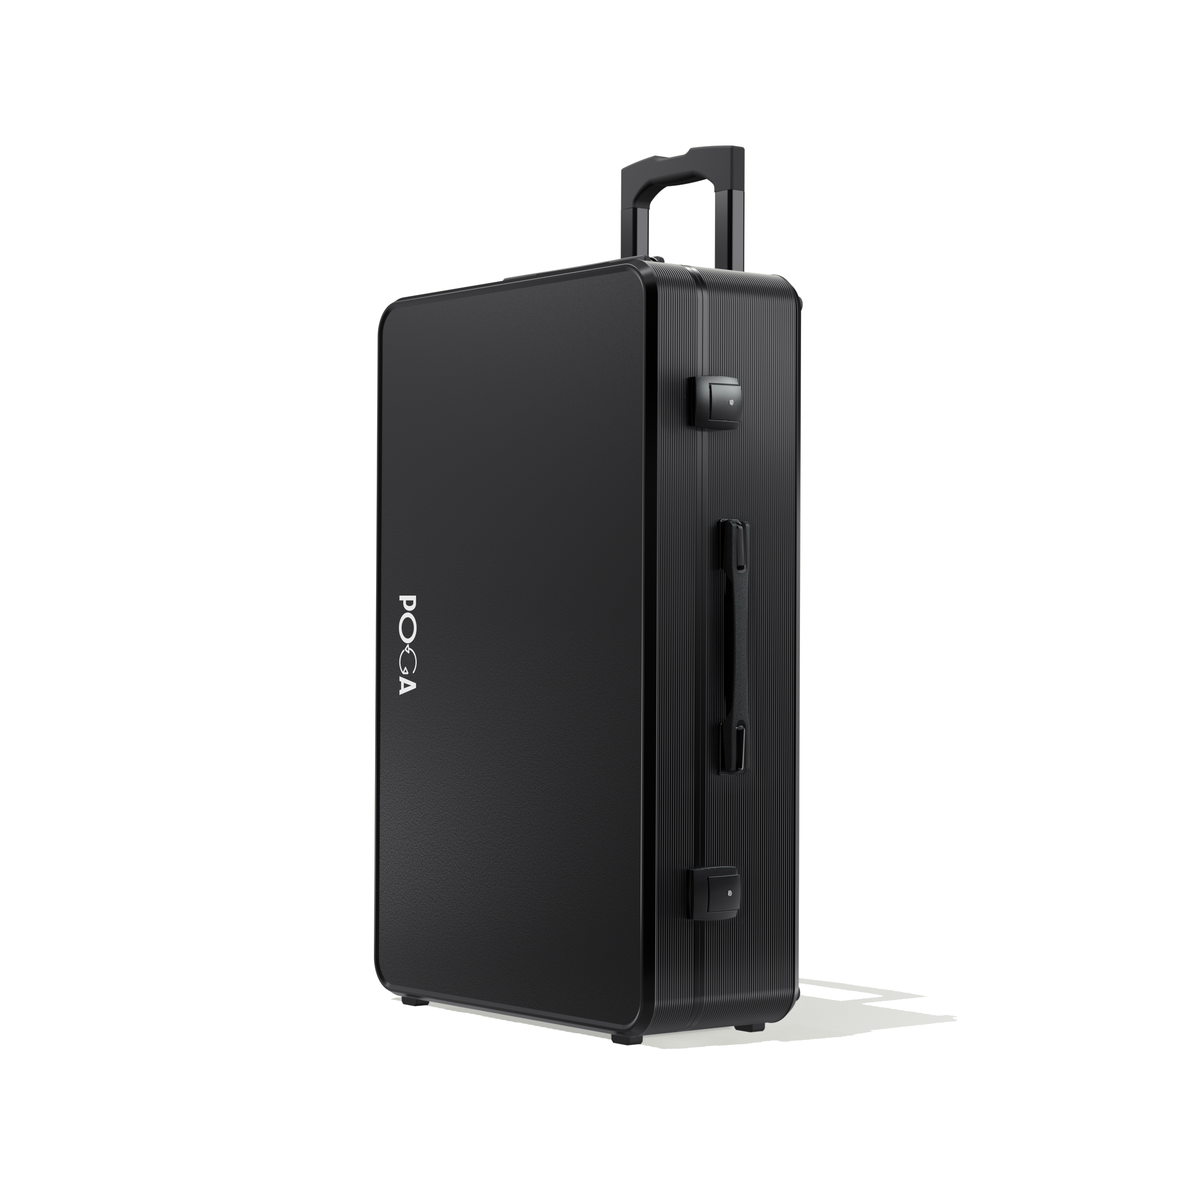 POGA Lux PS5 Portable Gaming Case